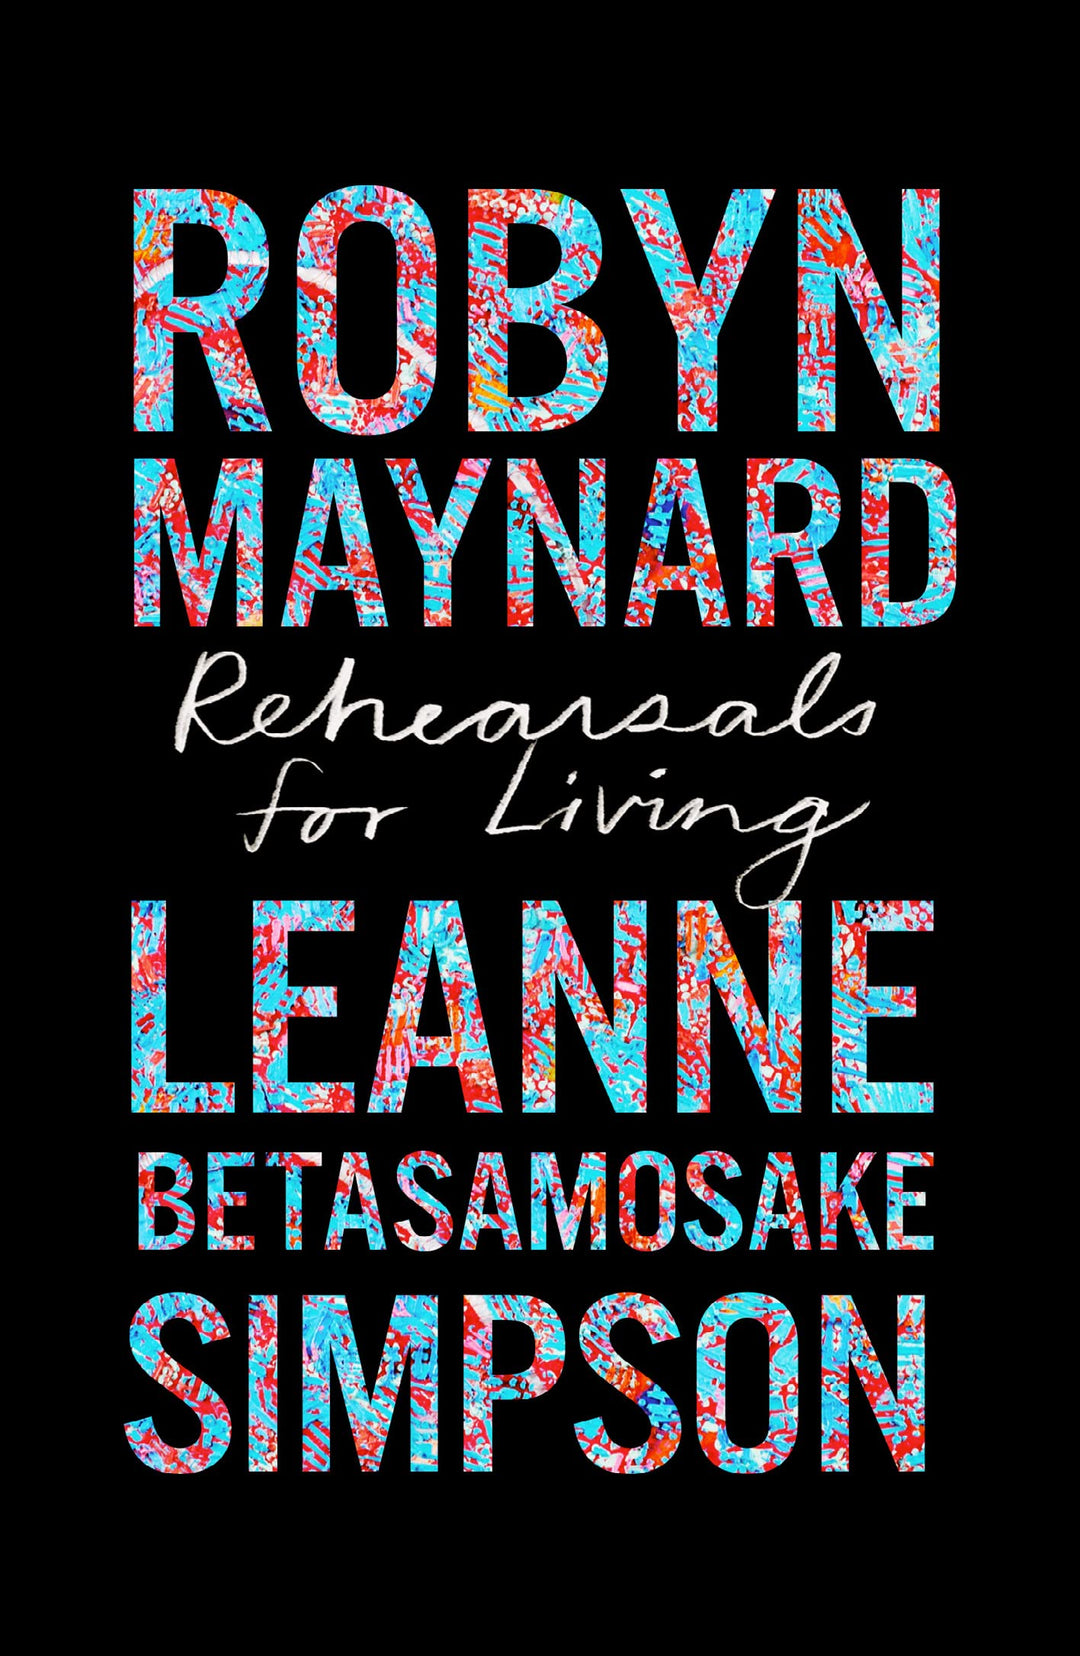 Rehearsals for Living by Robyn Maynard & Leanne Betasamosake Simpson